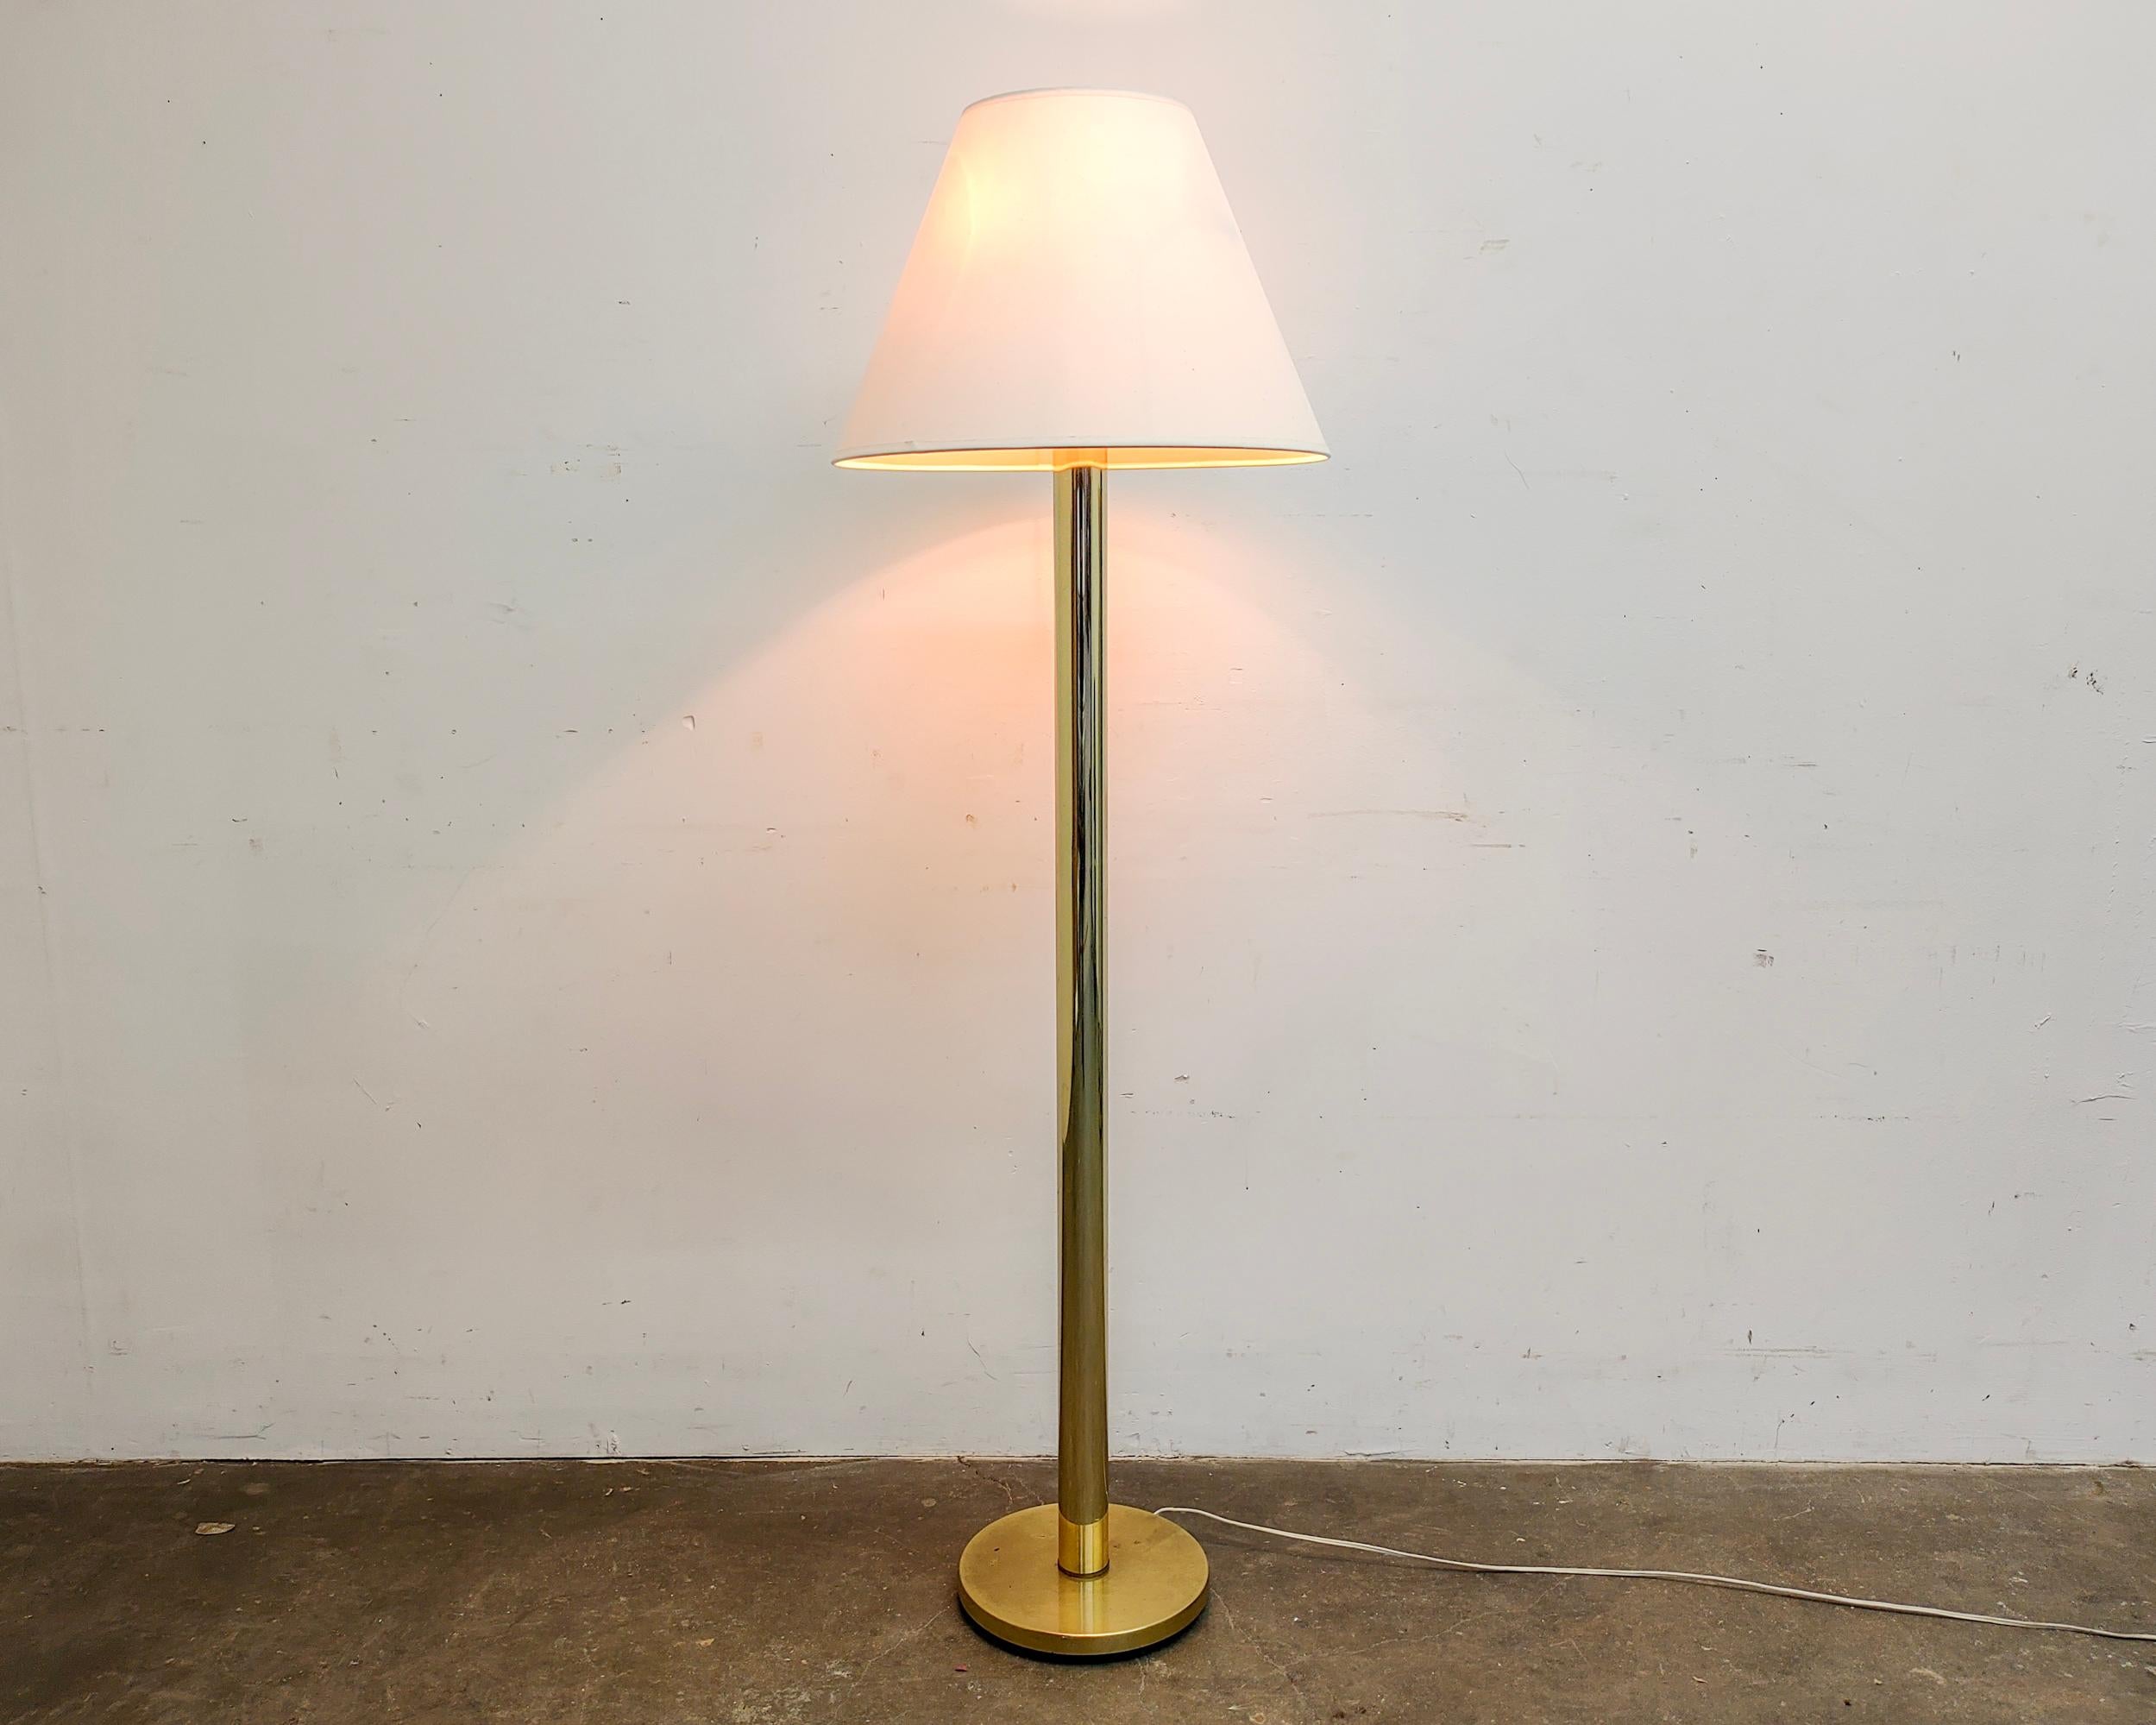 Minimal brass column floor lamp by Karl Springer for Koch and Lowy circa 1970. Two lights with individual on/off pull chains. Overall great condition, some very light wear consistent with vintage age. Original shade and finial has been